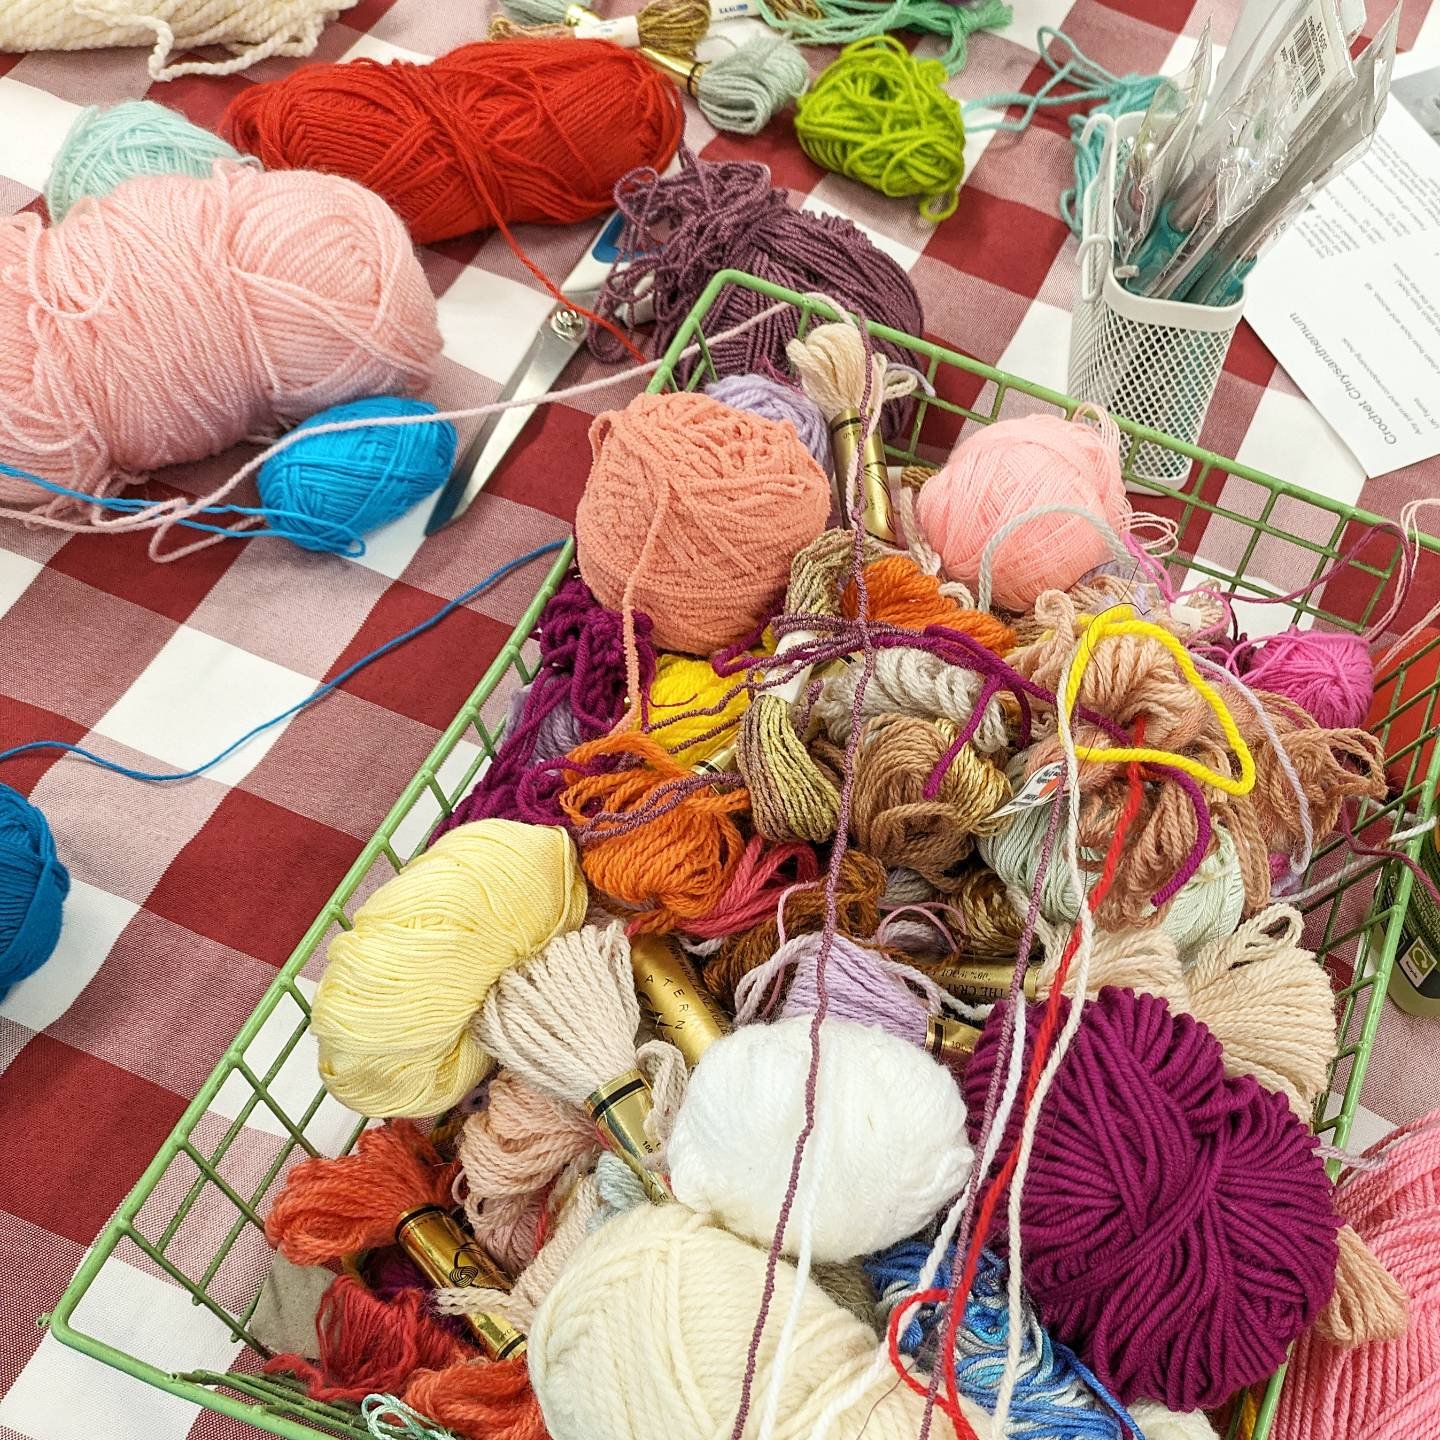 Yarn chaos (and fun!) in our weekly textiles group. If you'd like to join, contact us today! 

#socialprescribing #creativehealth #creativehealthcamden #knittingismyyoga